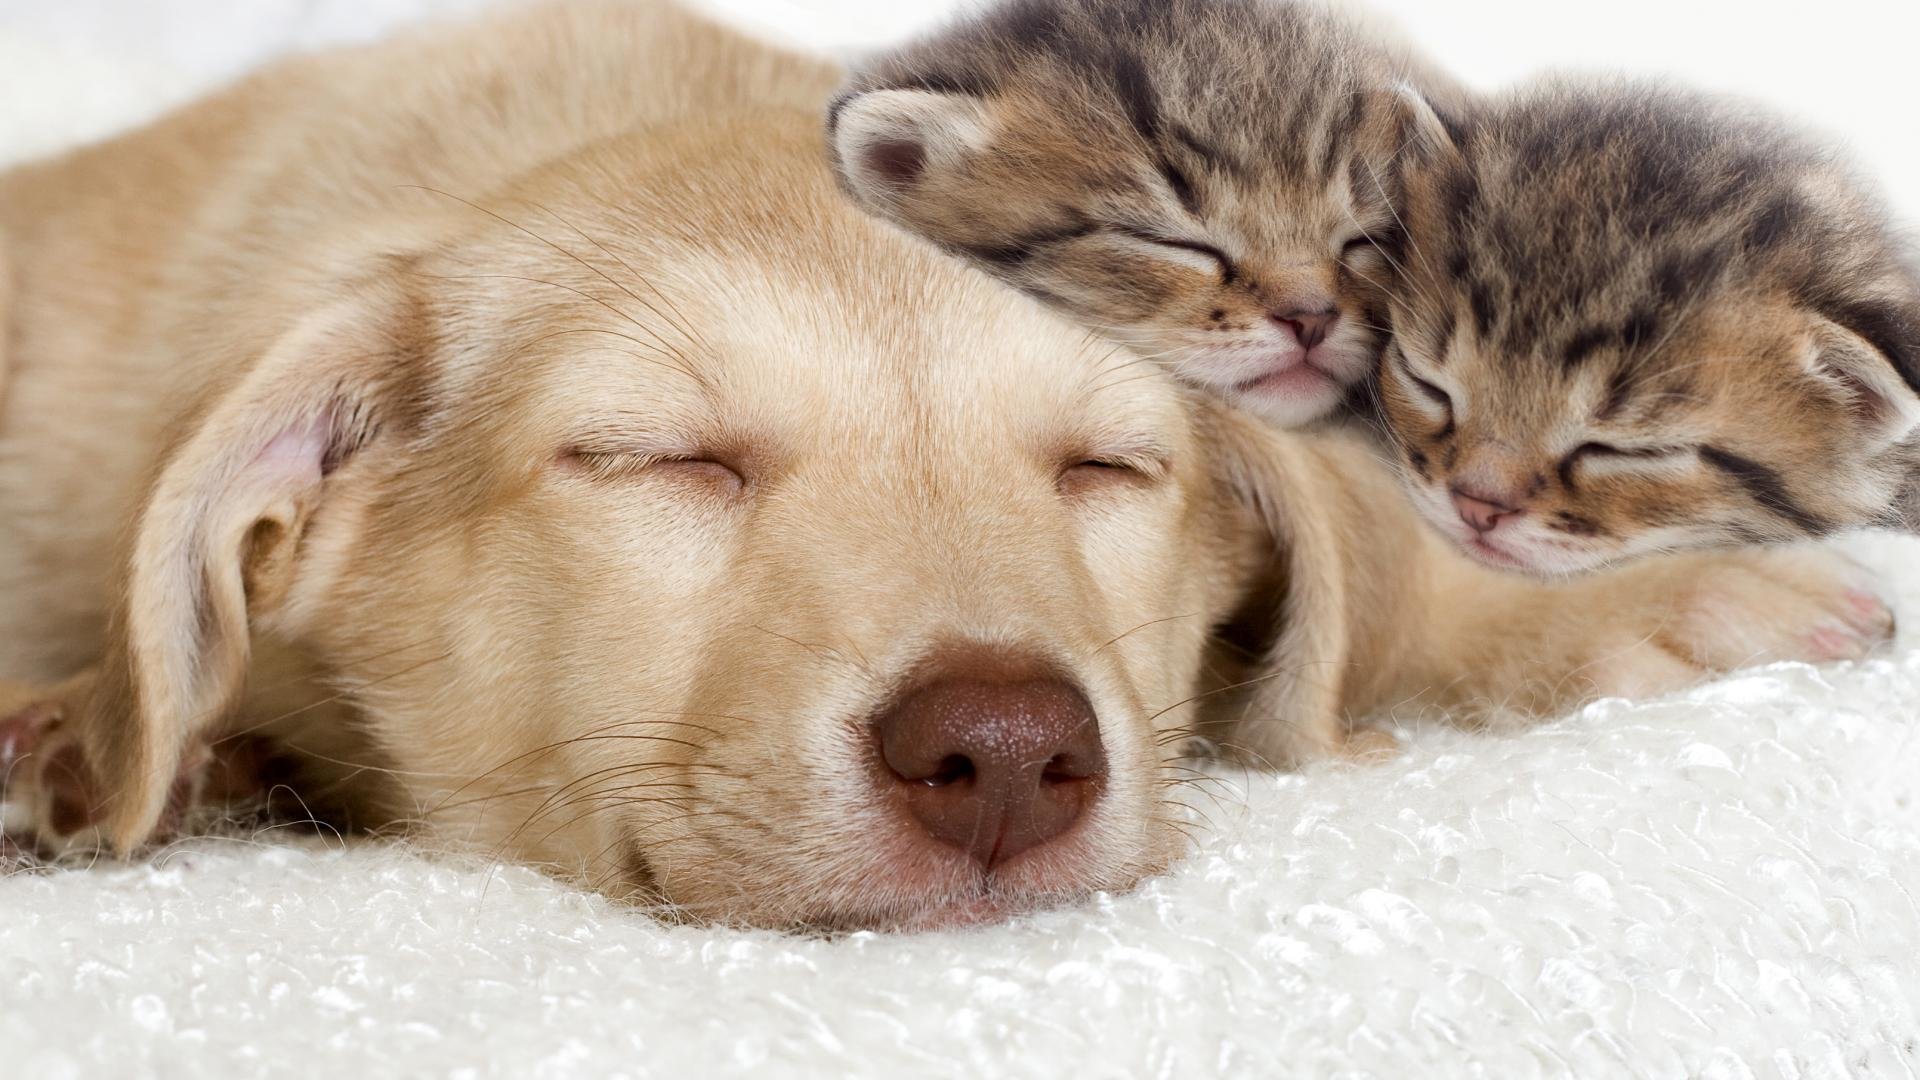 Free Cat And Dog High Quality Wallpaper Id - Kittens And Puppies Sleeping - HD Wallpaper 